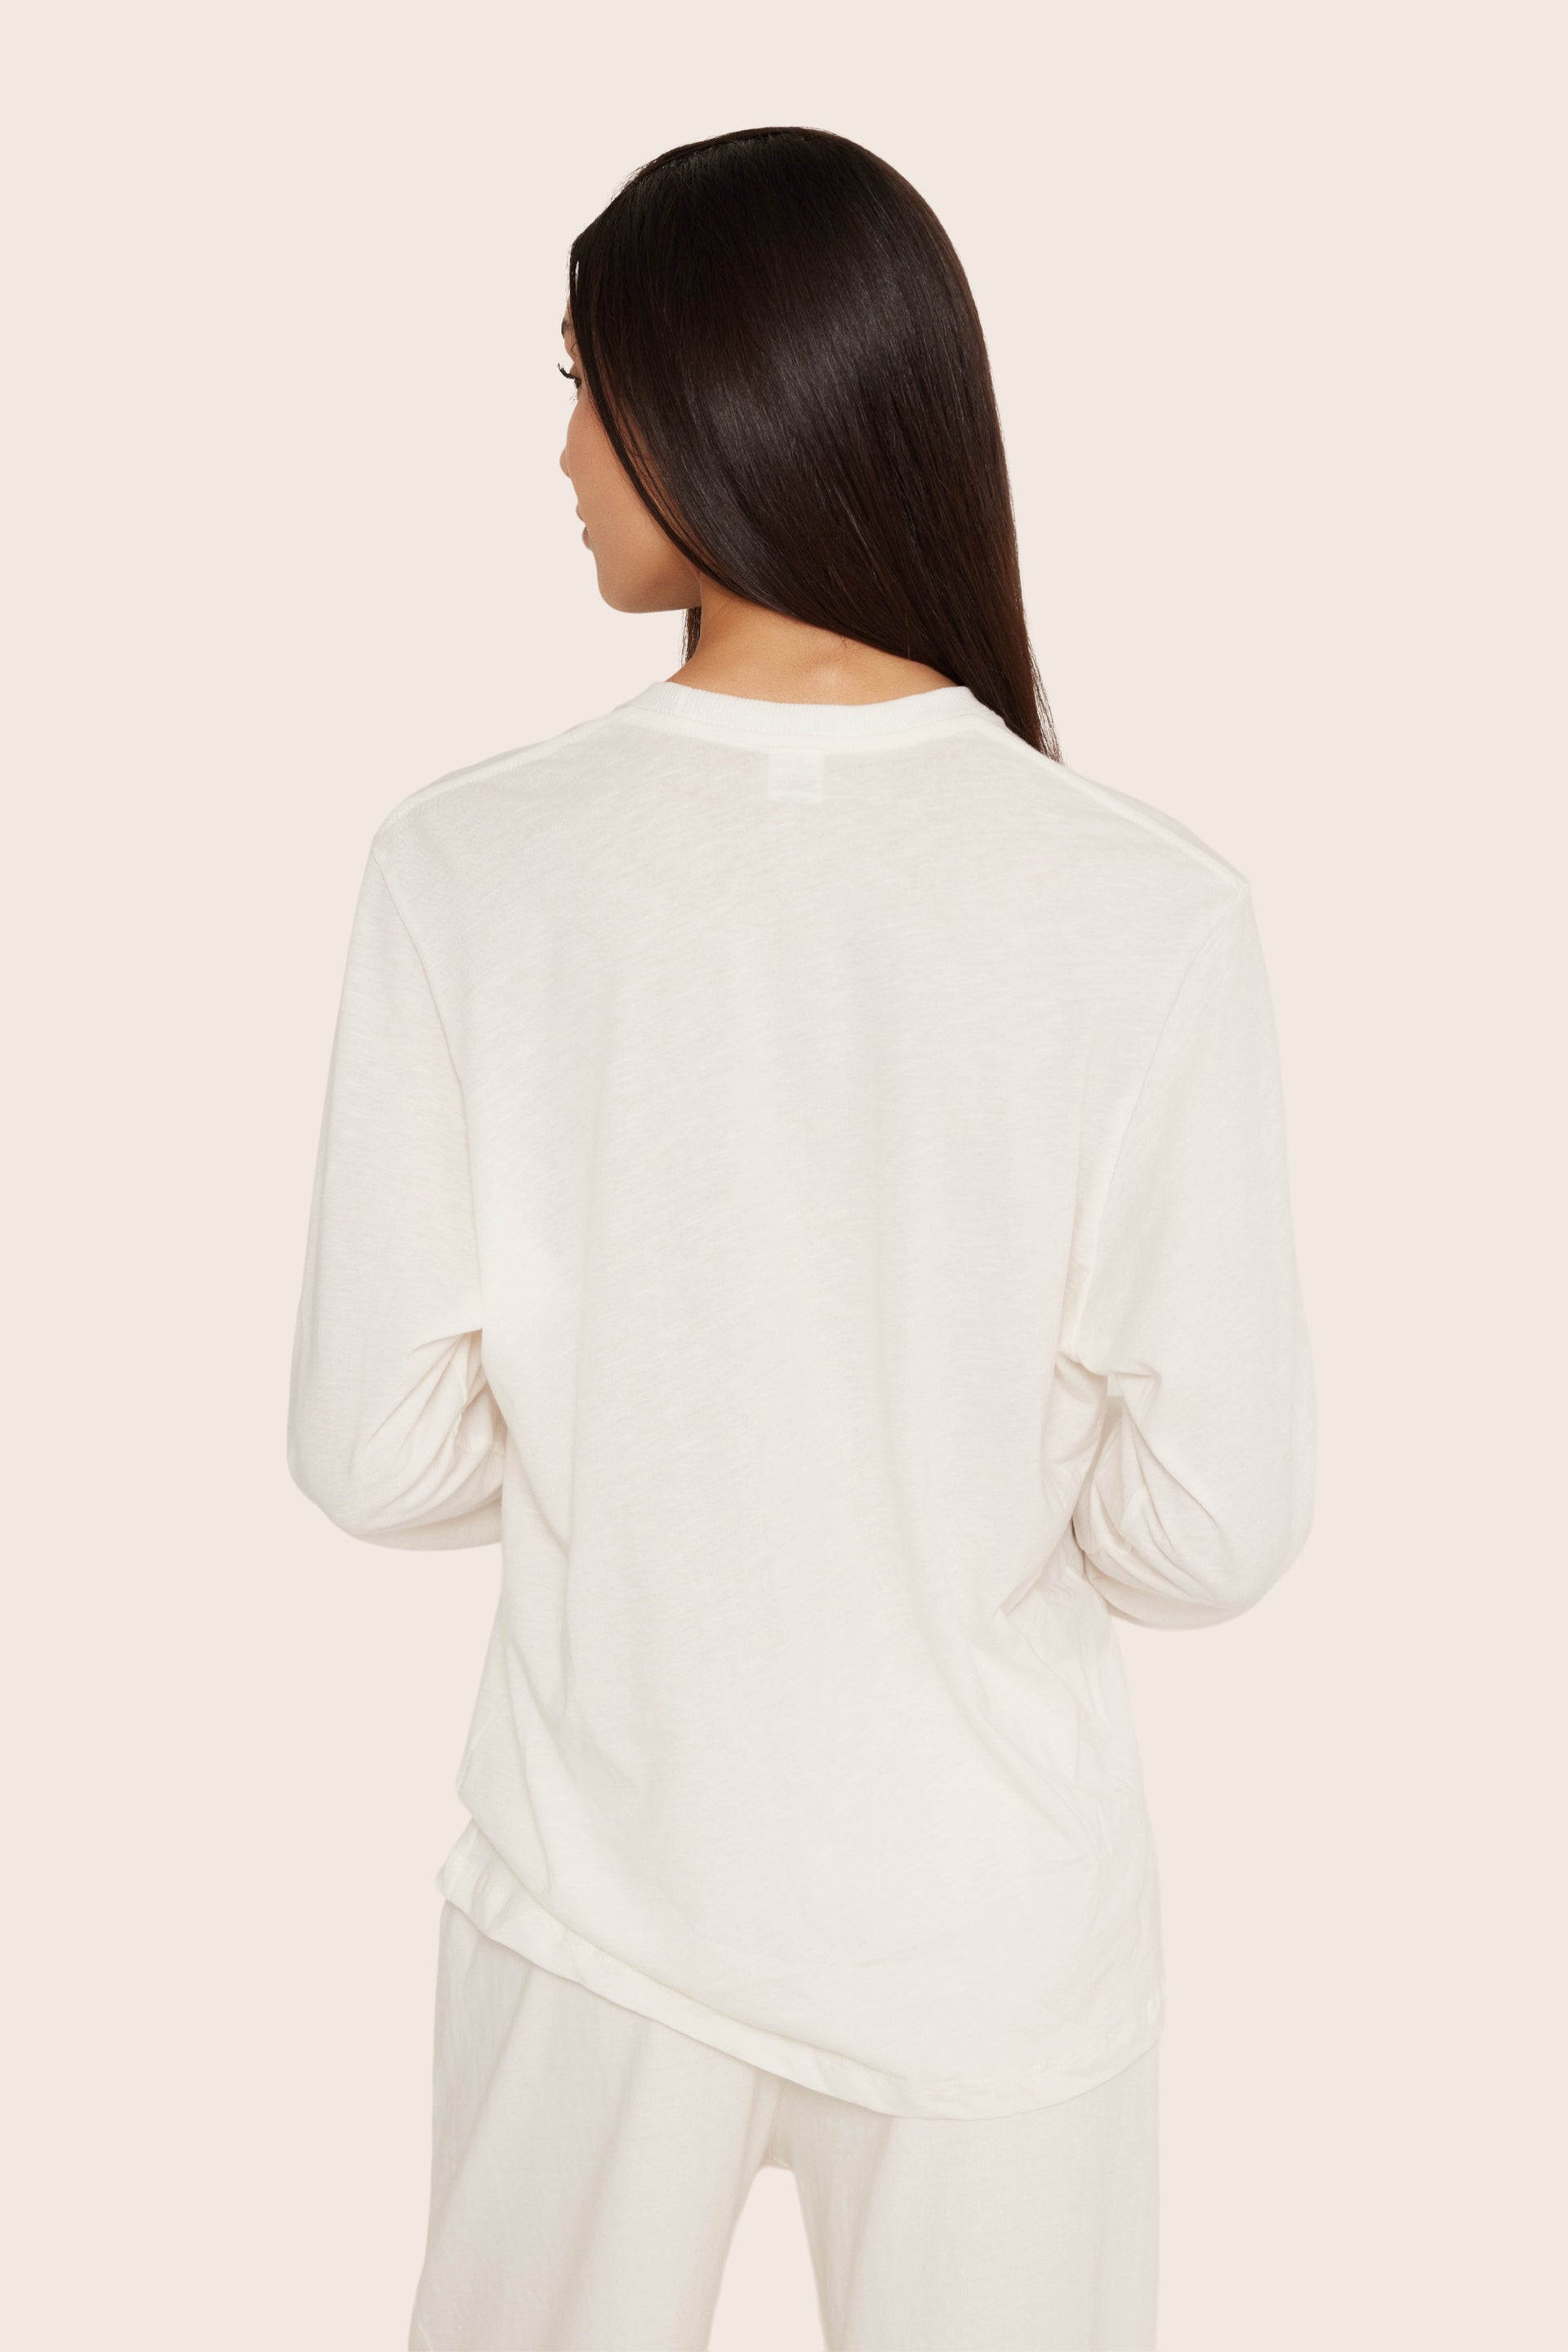 SET™ CLASSIC COTTON DAILY LONG SLEEVE IN BLANC